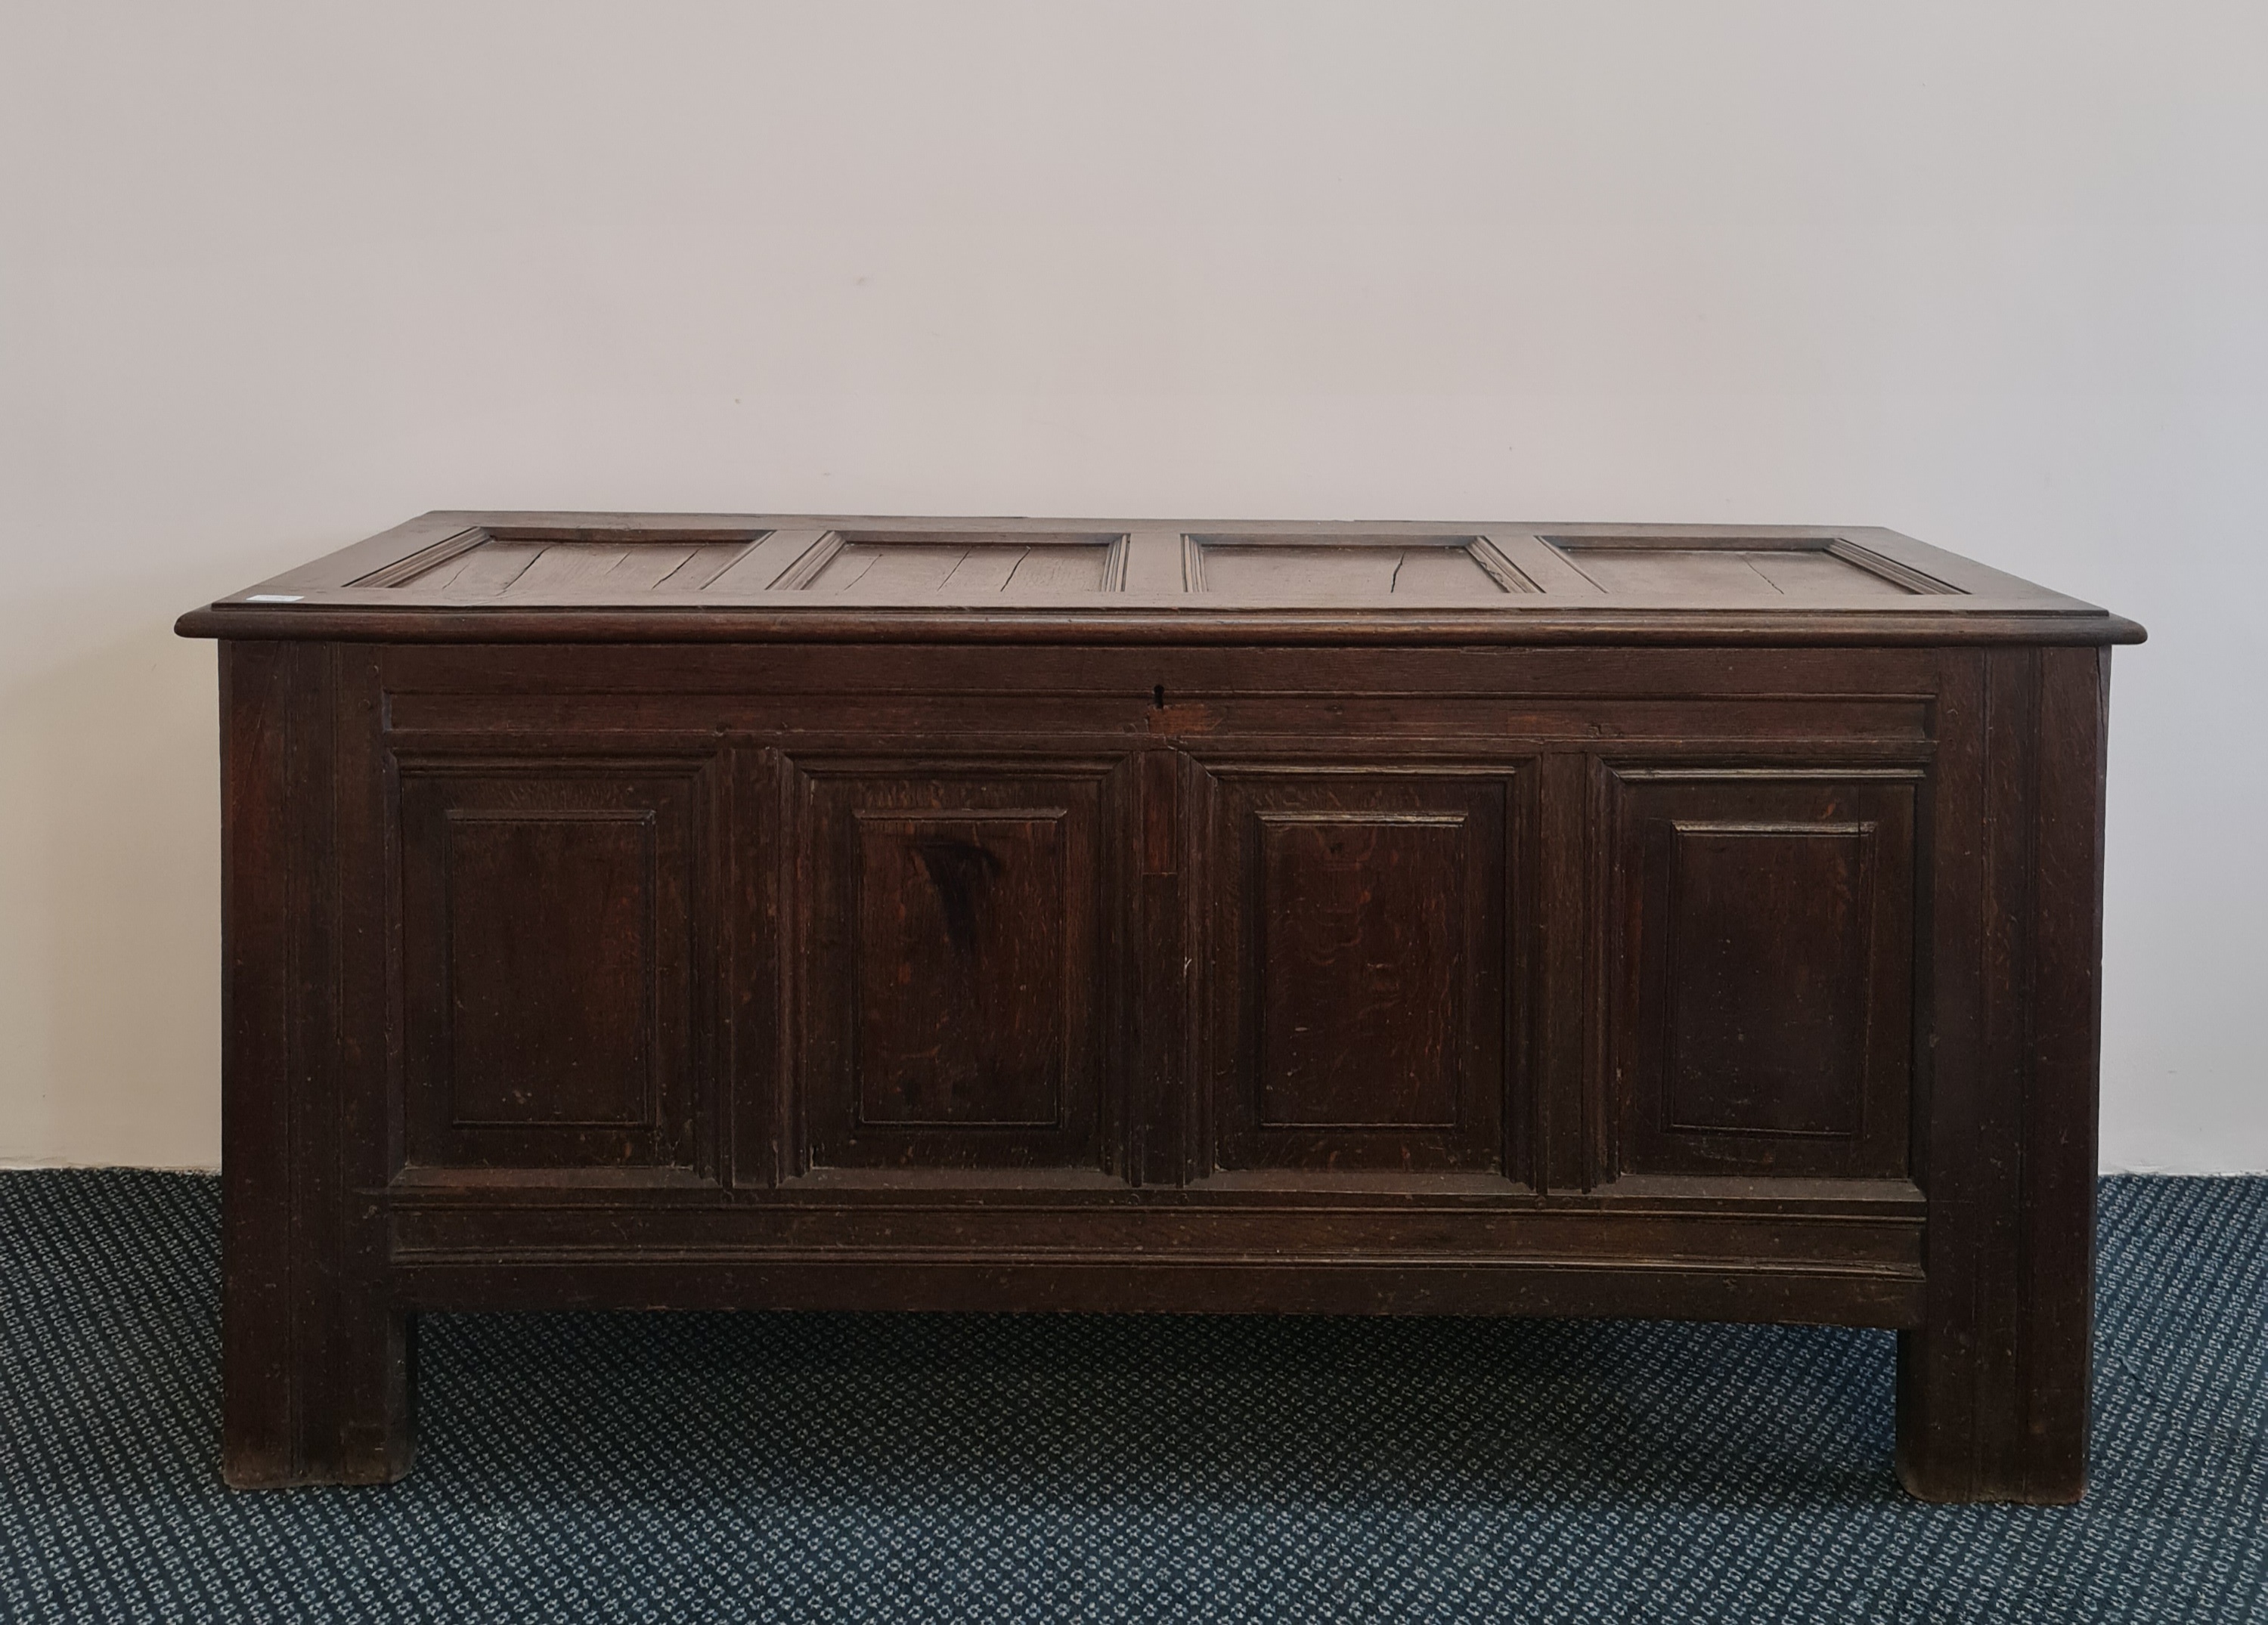 An 18th century oak four panel blanket box, 68cm x 146cm x 53cm. IMPORTANT: Online viewing and